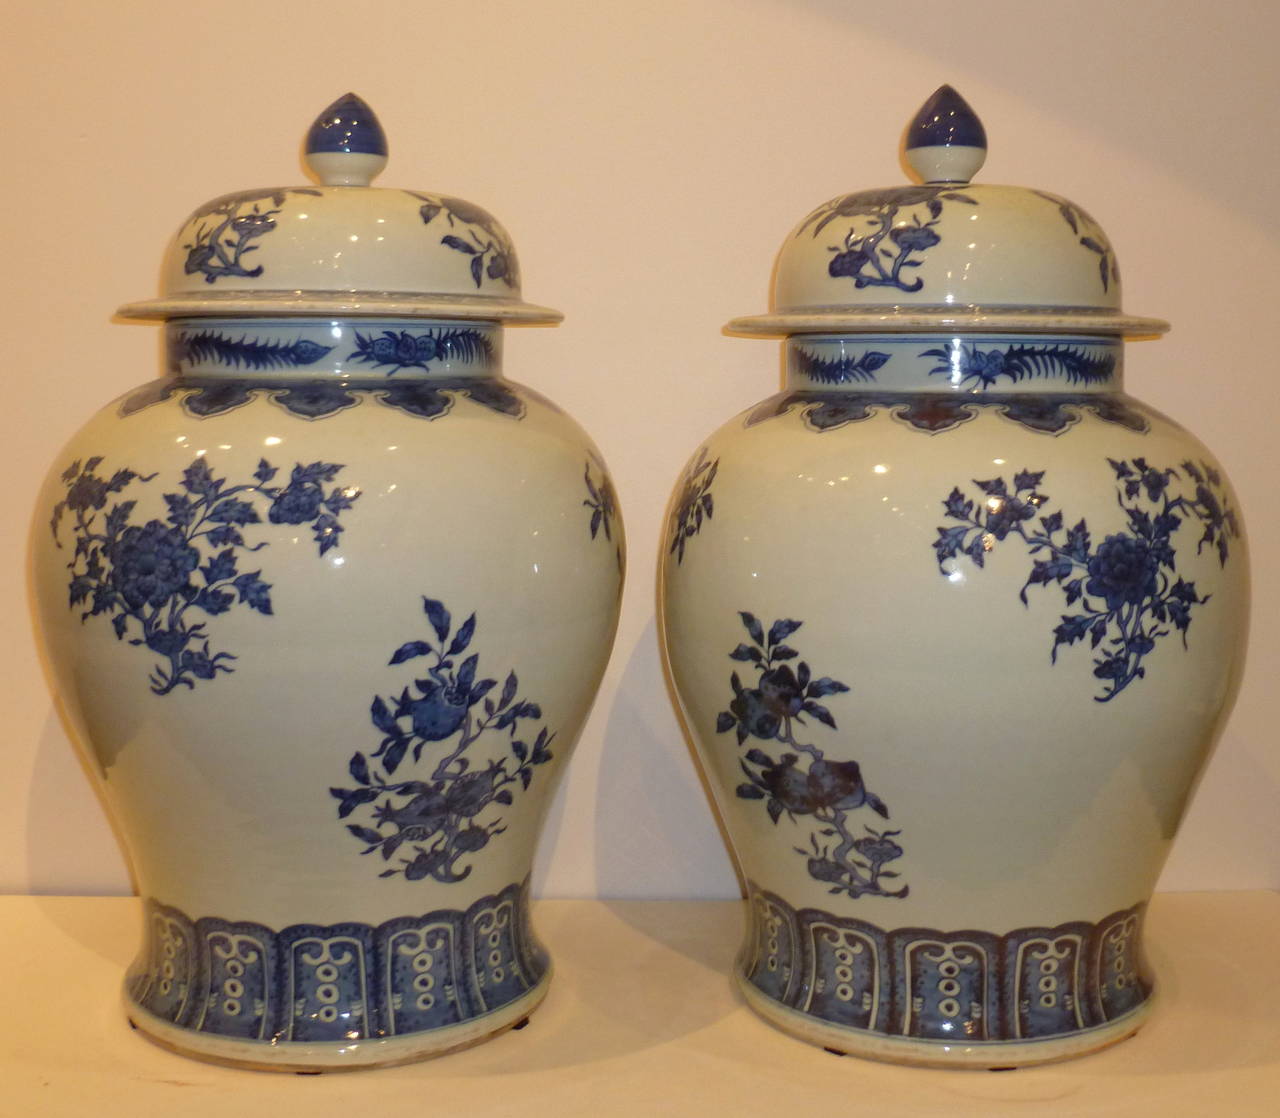 Ming A Pair of Blue and White Porcelain Jars with Covers